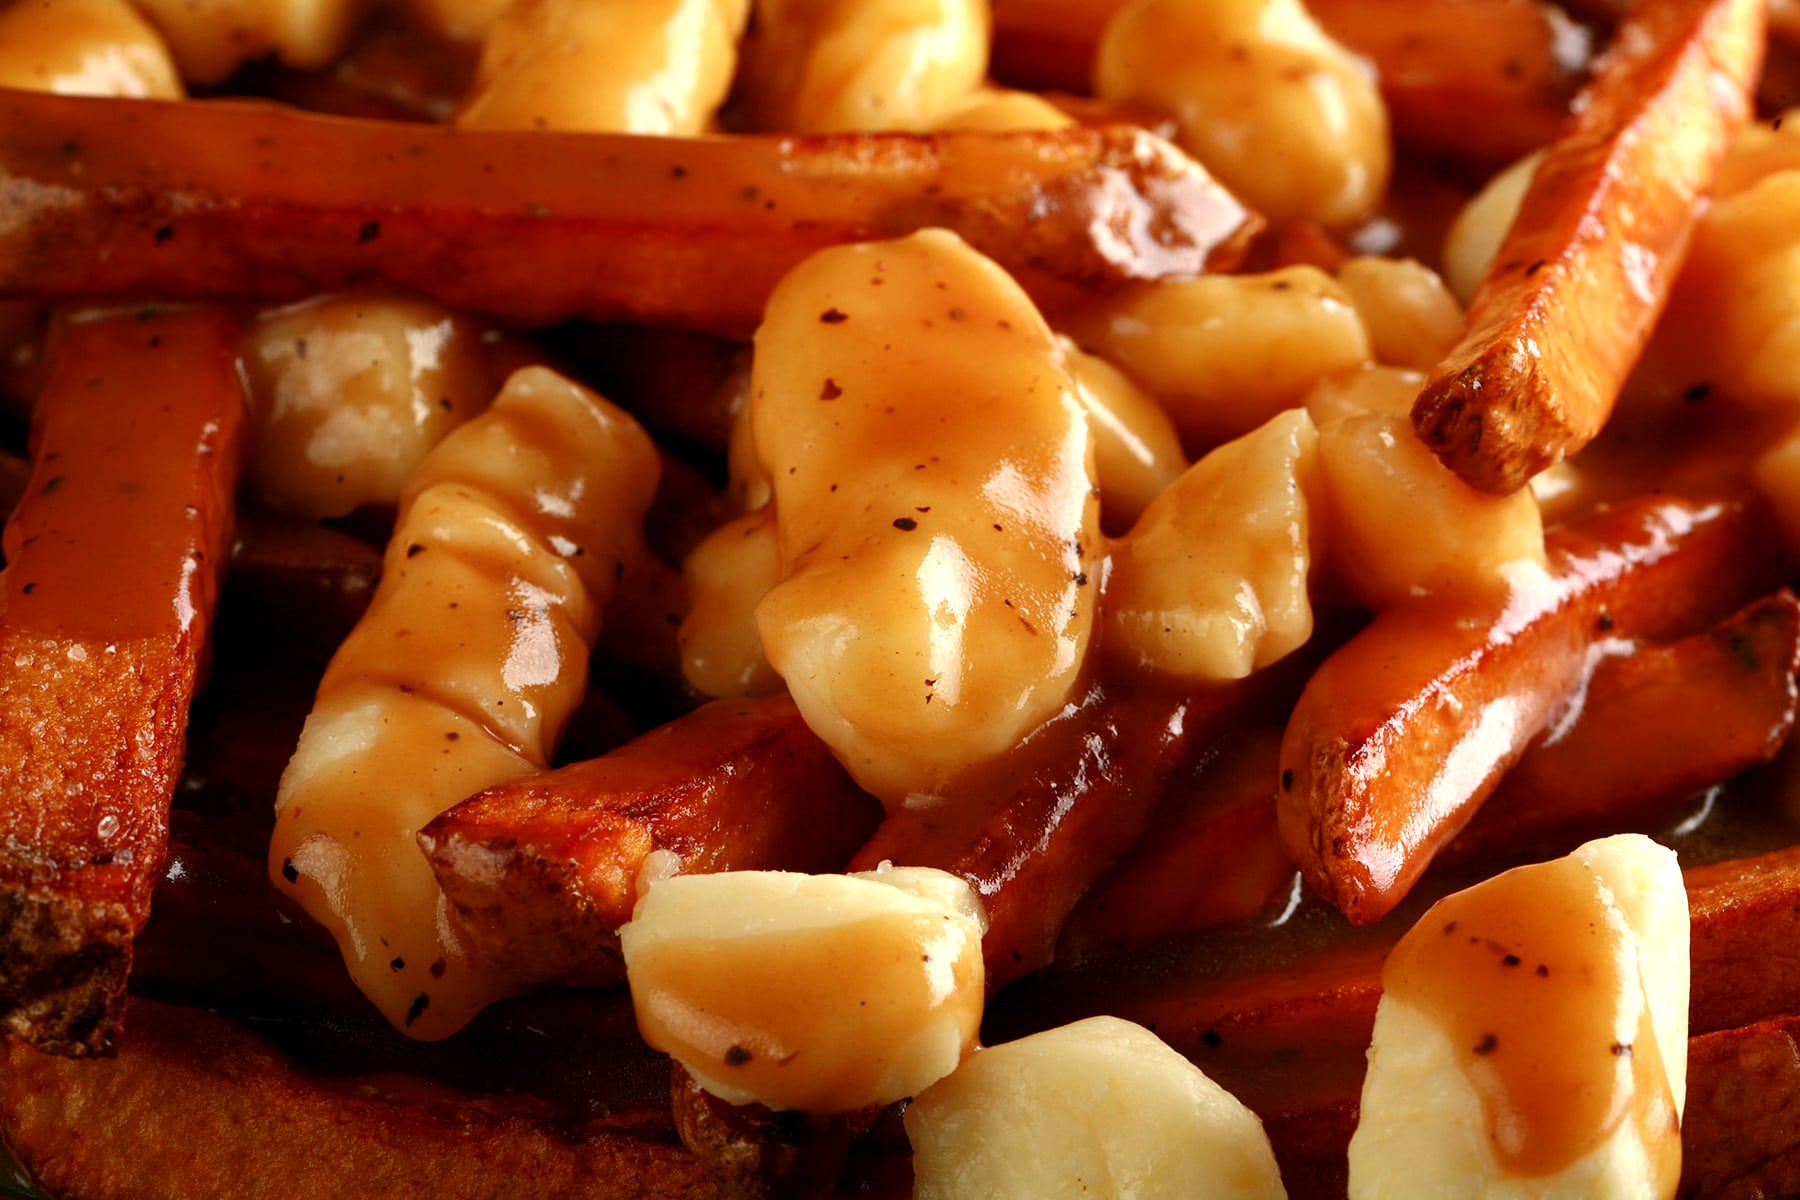 A close up photo of a plate of authentic poutine.